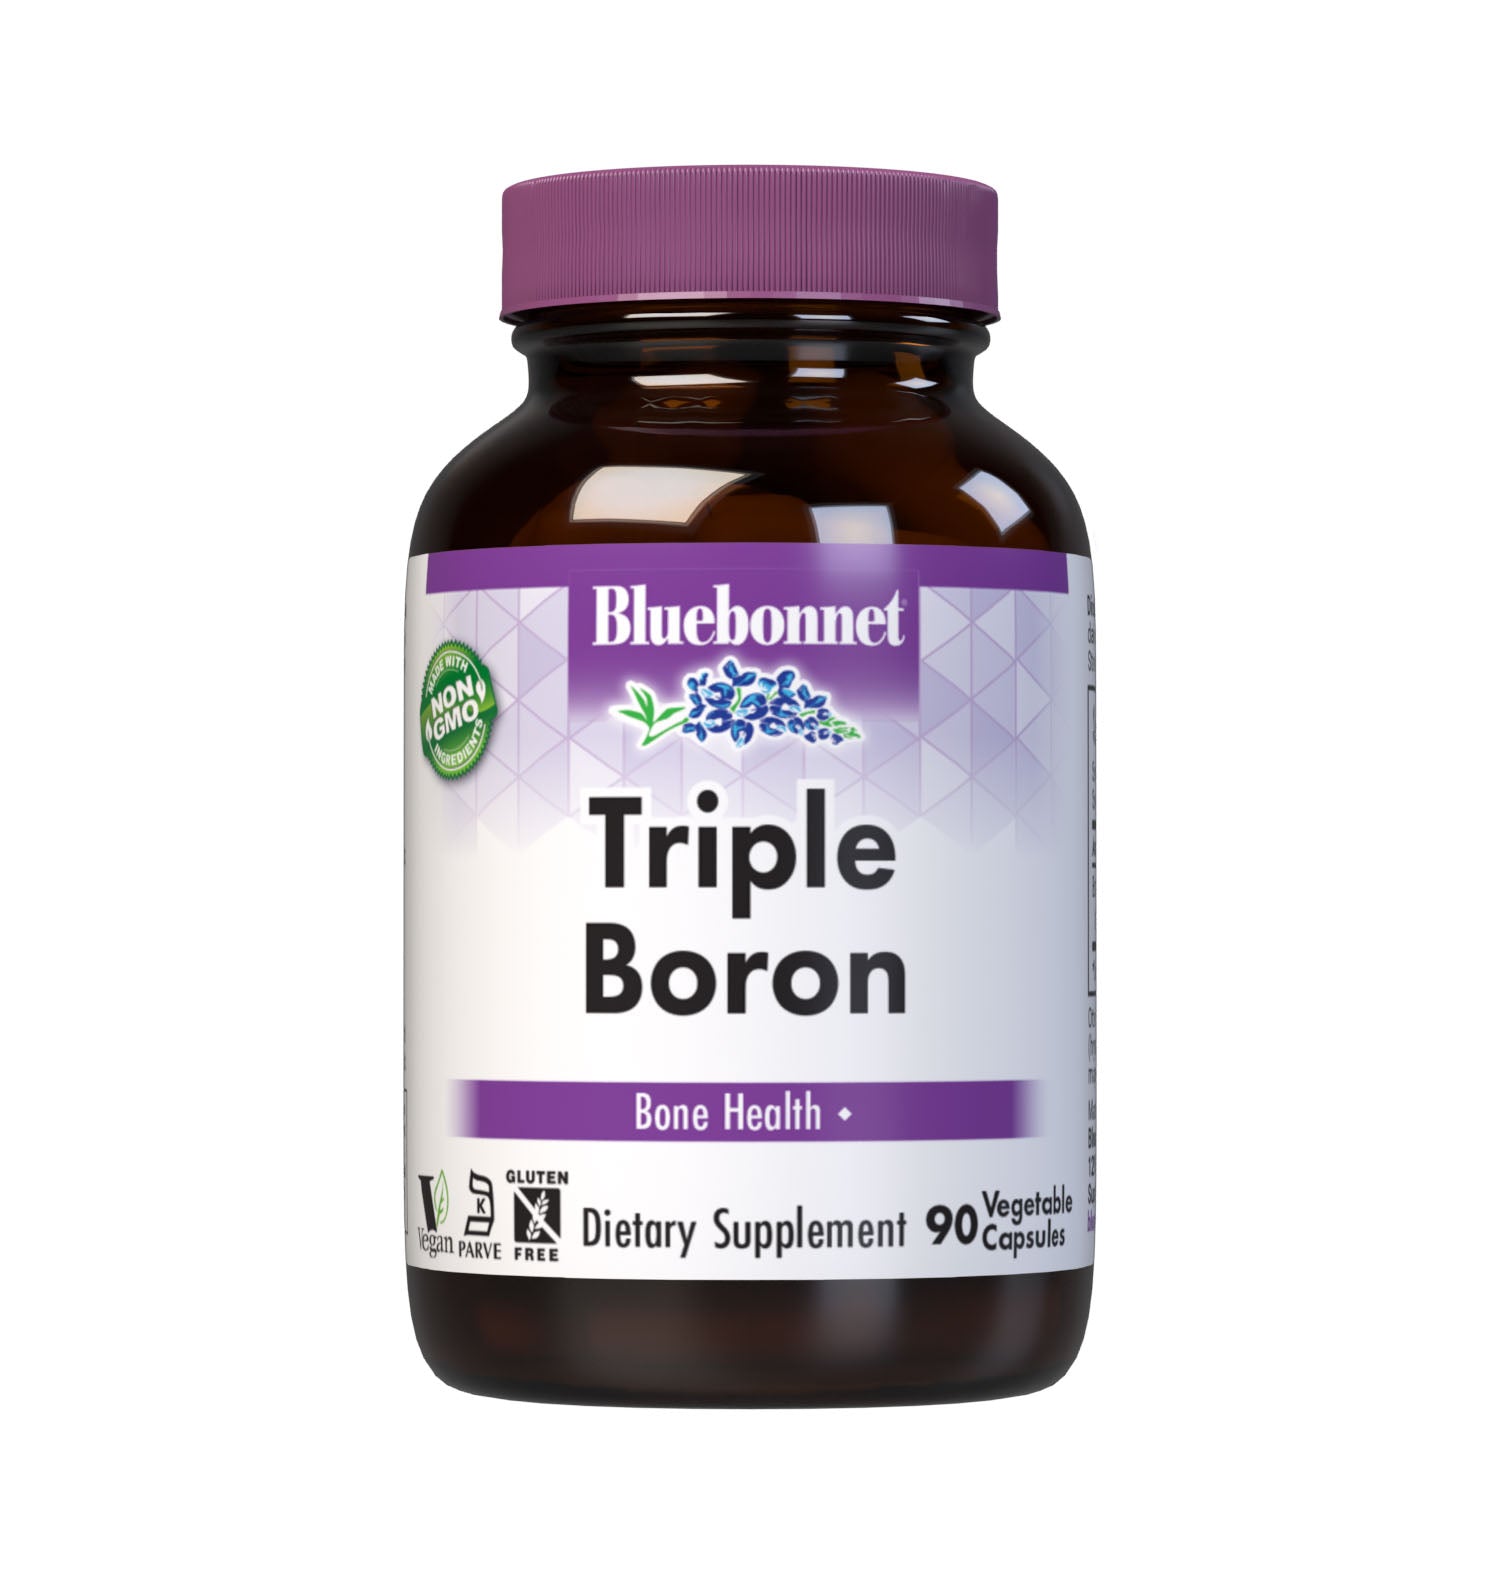 Bluebonnet's Triple Boron 3 mg 90 Vegetable Capsules are formulated with the trace mineral boron, which is multicomplexed with citrate, aspartate and glycinate. Boron is a trace element that helps support bone strength.  #size_90 count